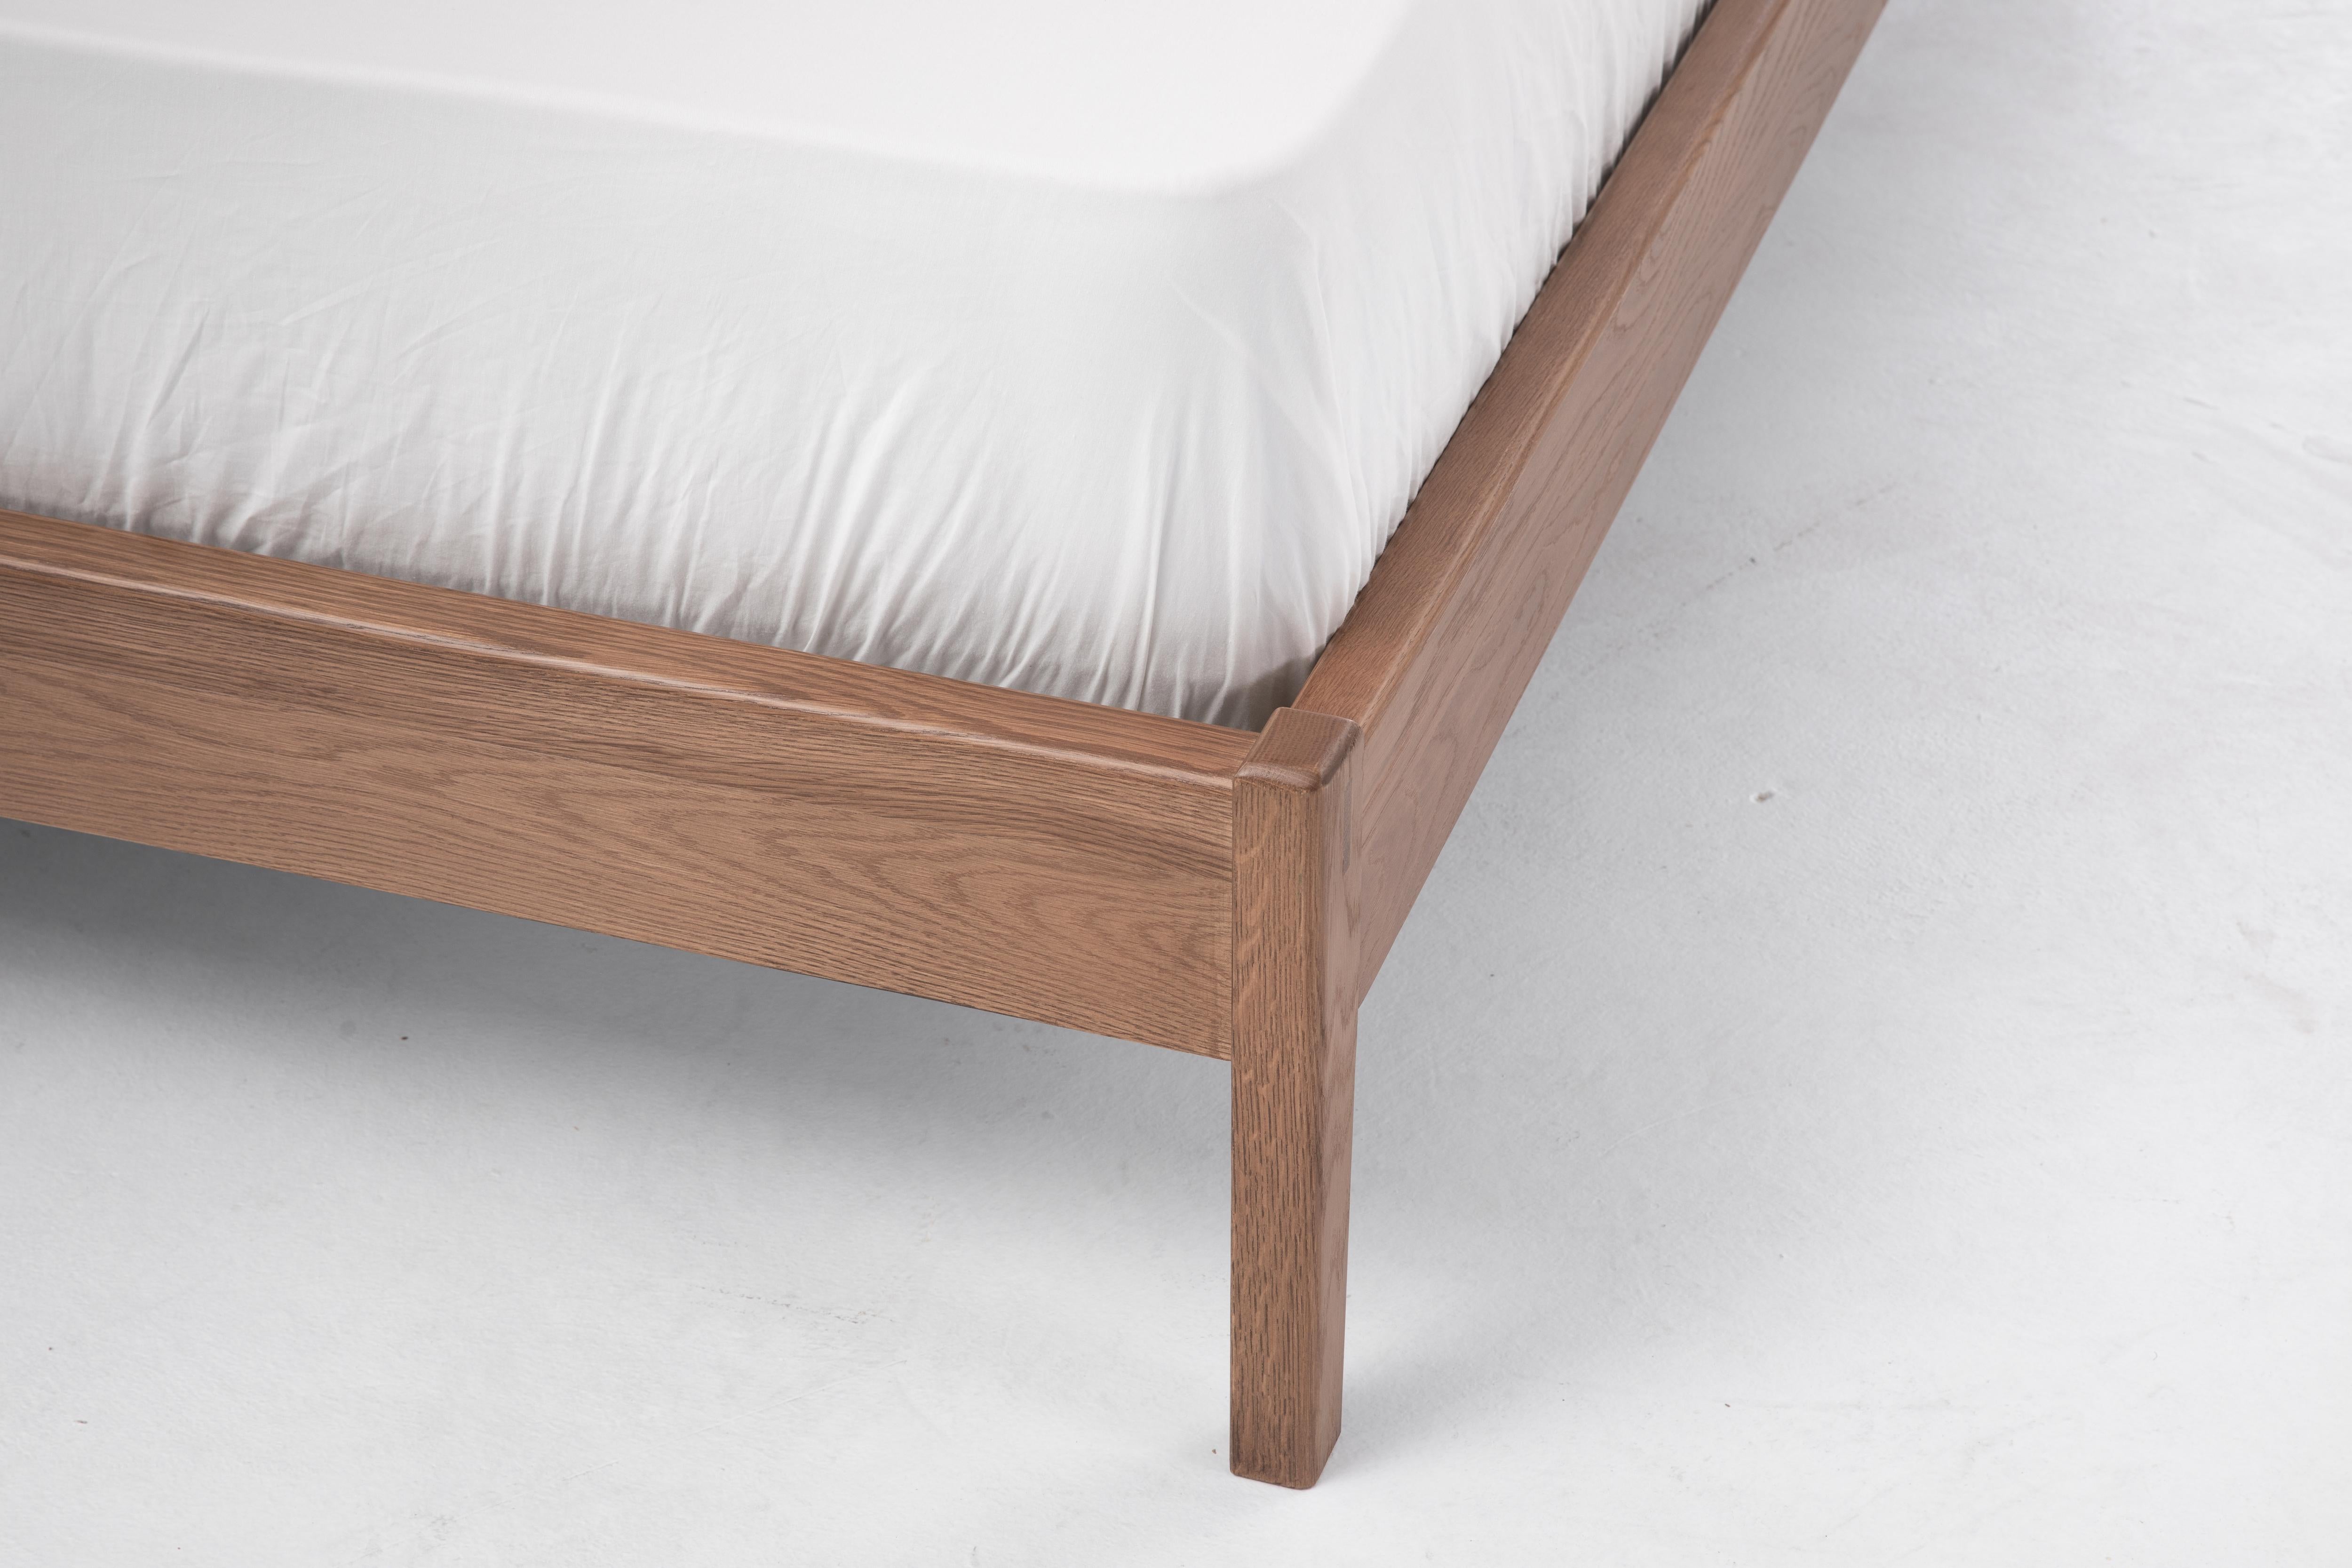 Sun at six is a contemporary furniture design studio working with traditional Chinese joinery masters to handcraft our pieces using traditional joinery. 

Great furniture begins with quality materials: raw, sustainably sourced white oak, our